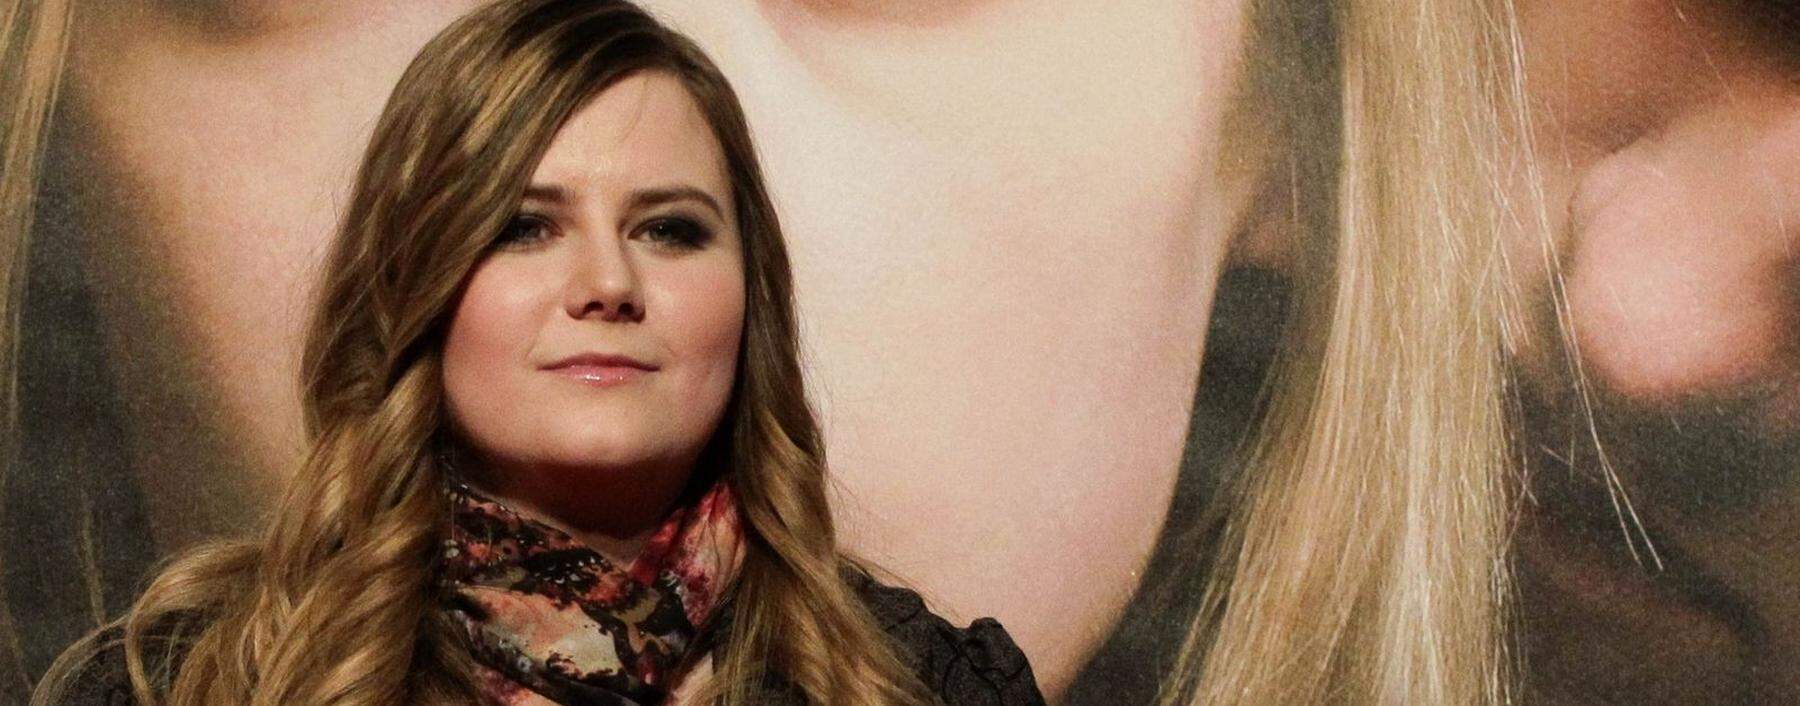 Austrian kidnap victim Natascha Kampusch poses in front of a film poster before the premiere of the film '3,096 Days' in a cinema in Vienna